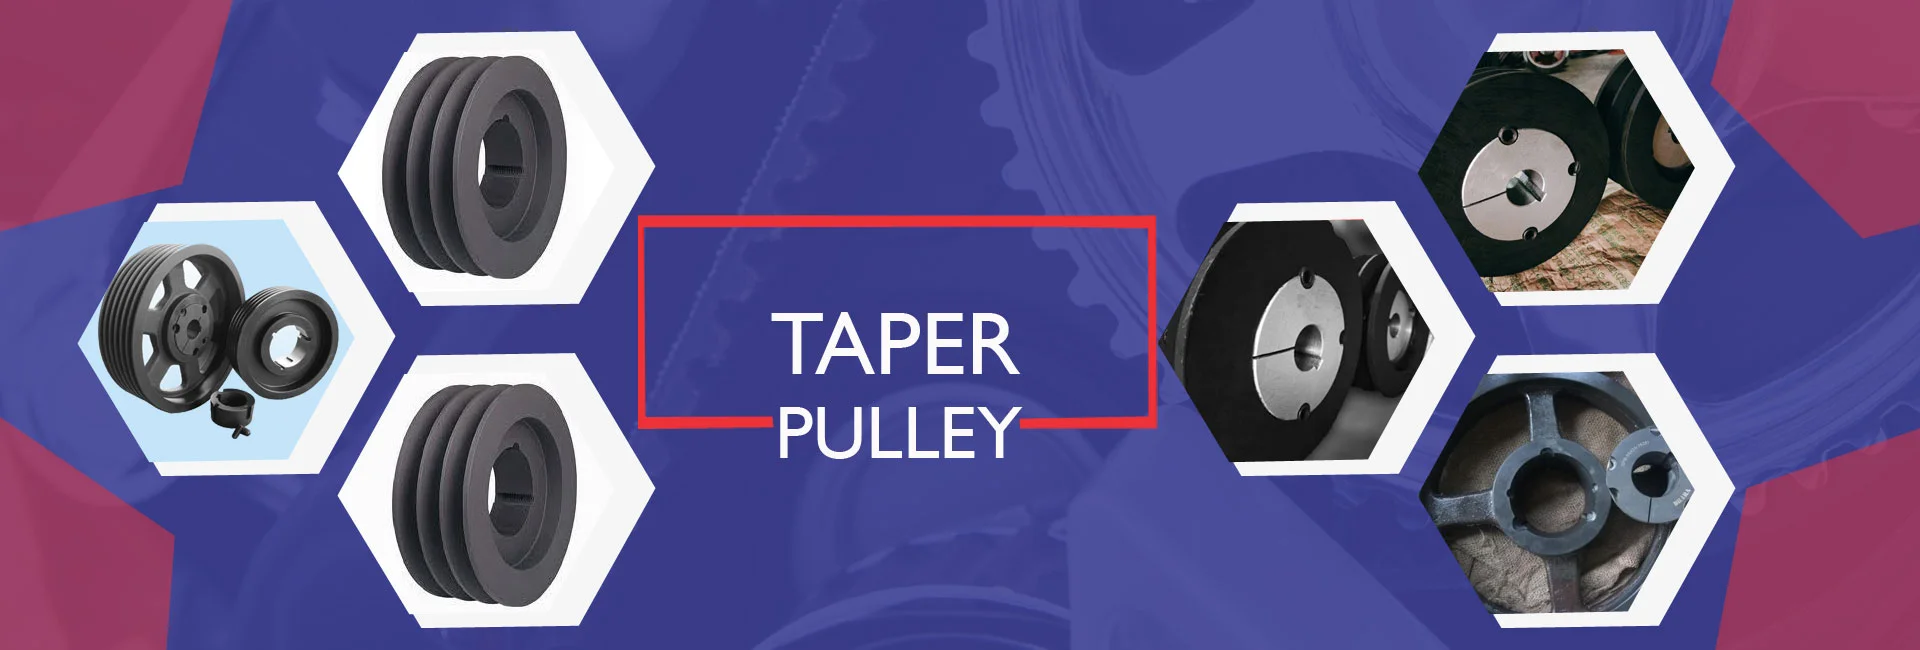 Taper Pulley supplier